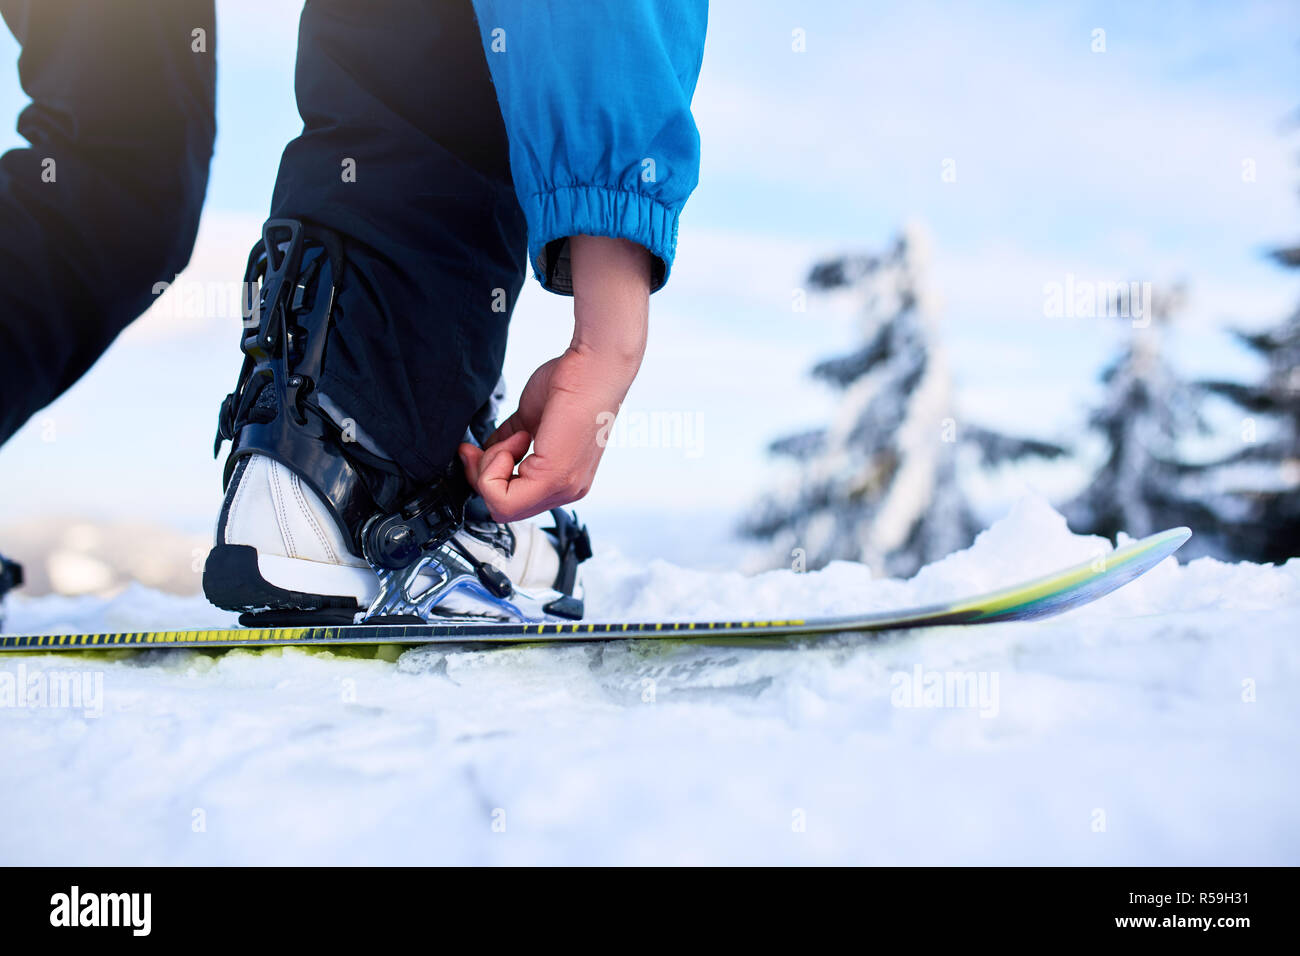 Snowboarder straps in his legs in snowboard boots in modern fast flow bindings with straps. Rider at ski resort prepares for freeride session. Man wearing fashionable outfit. Stock Photo